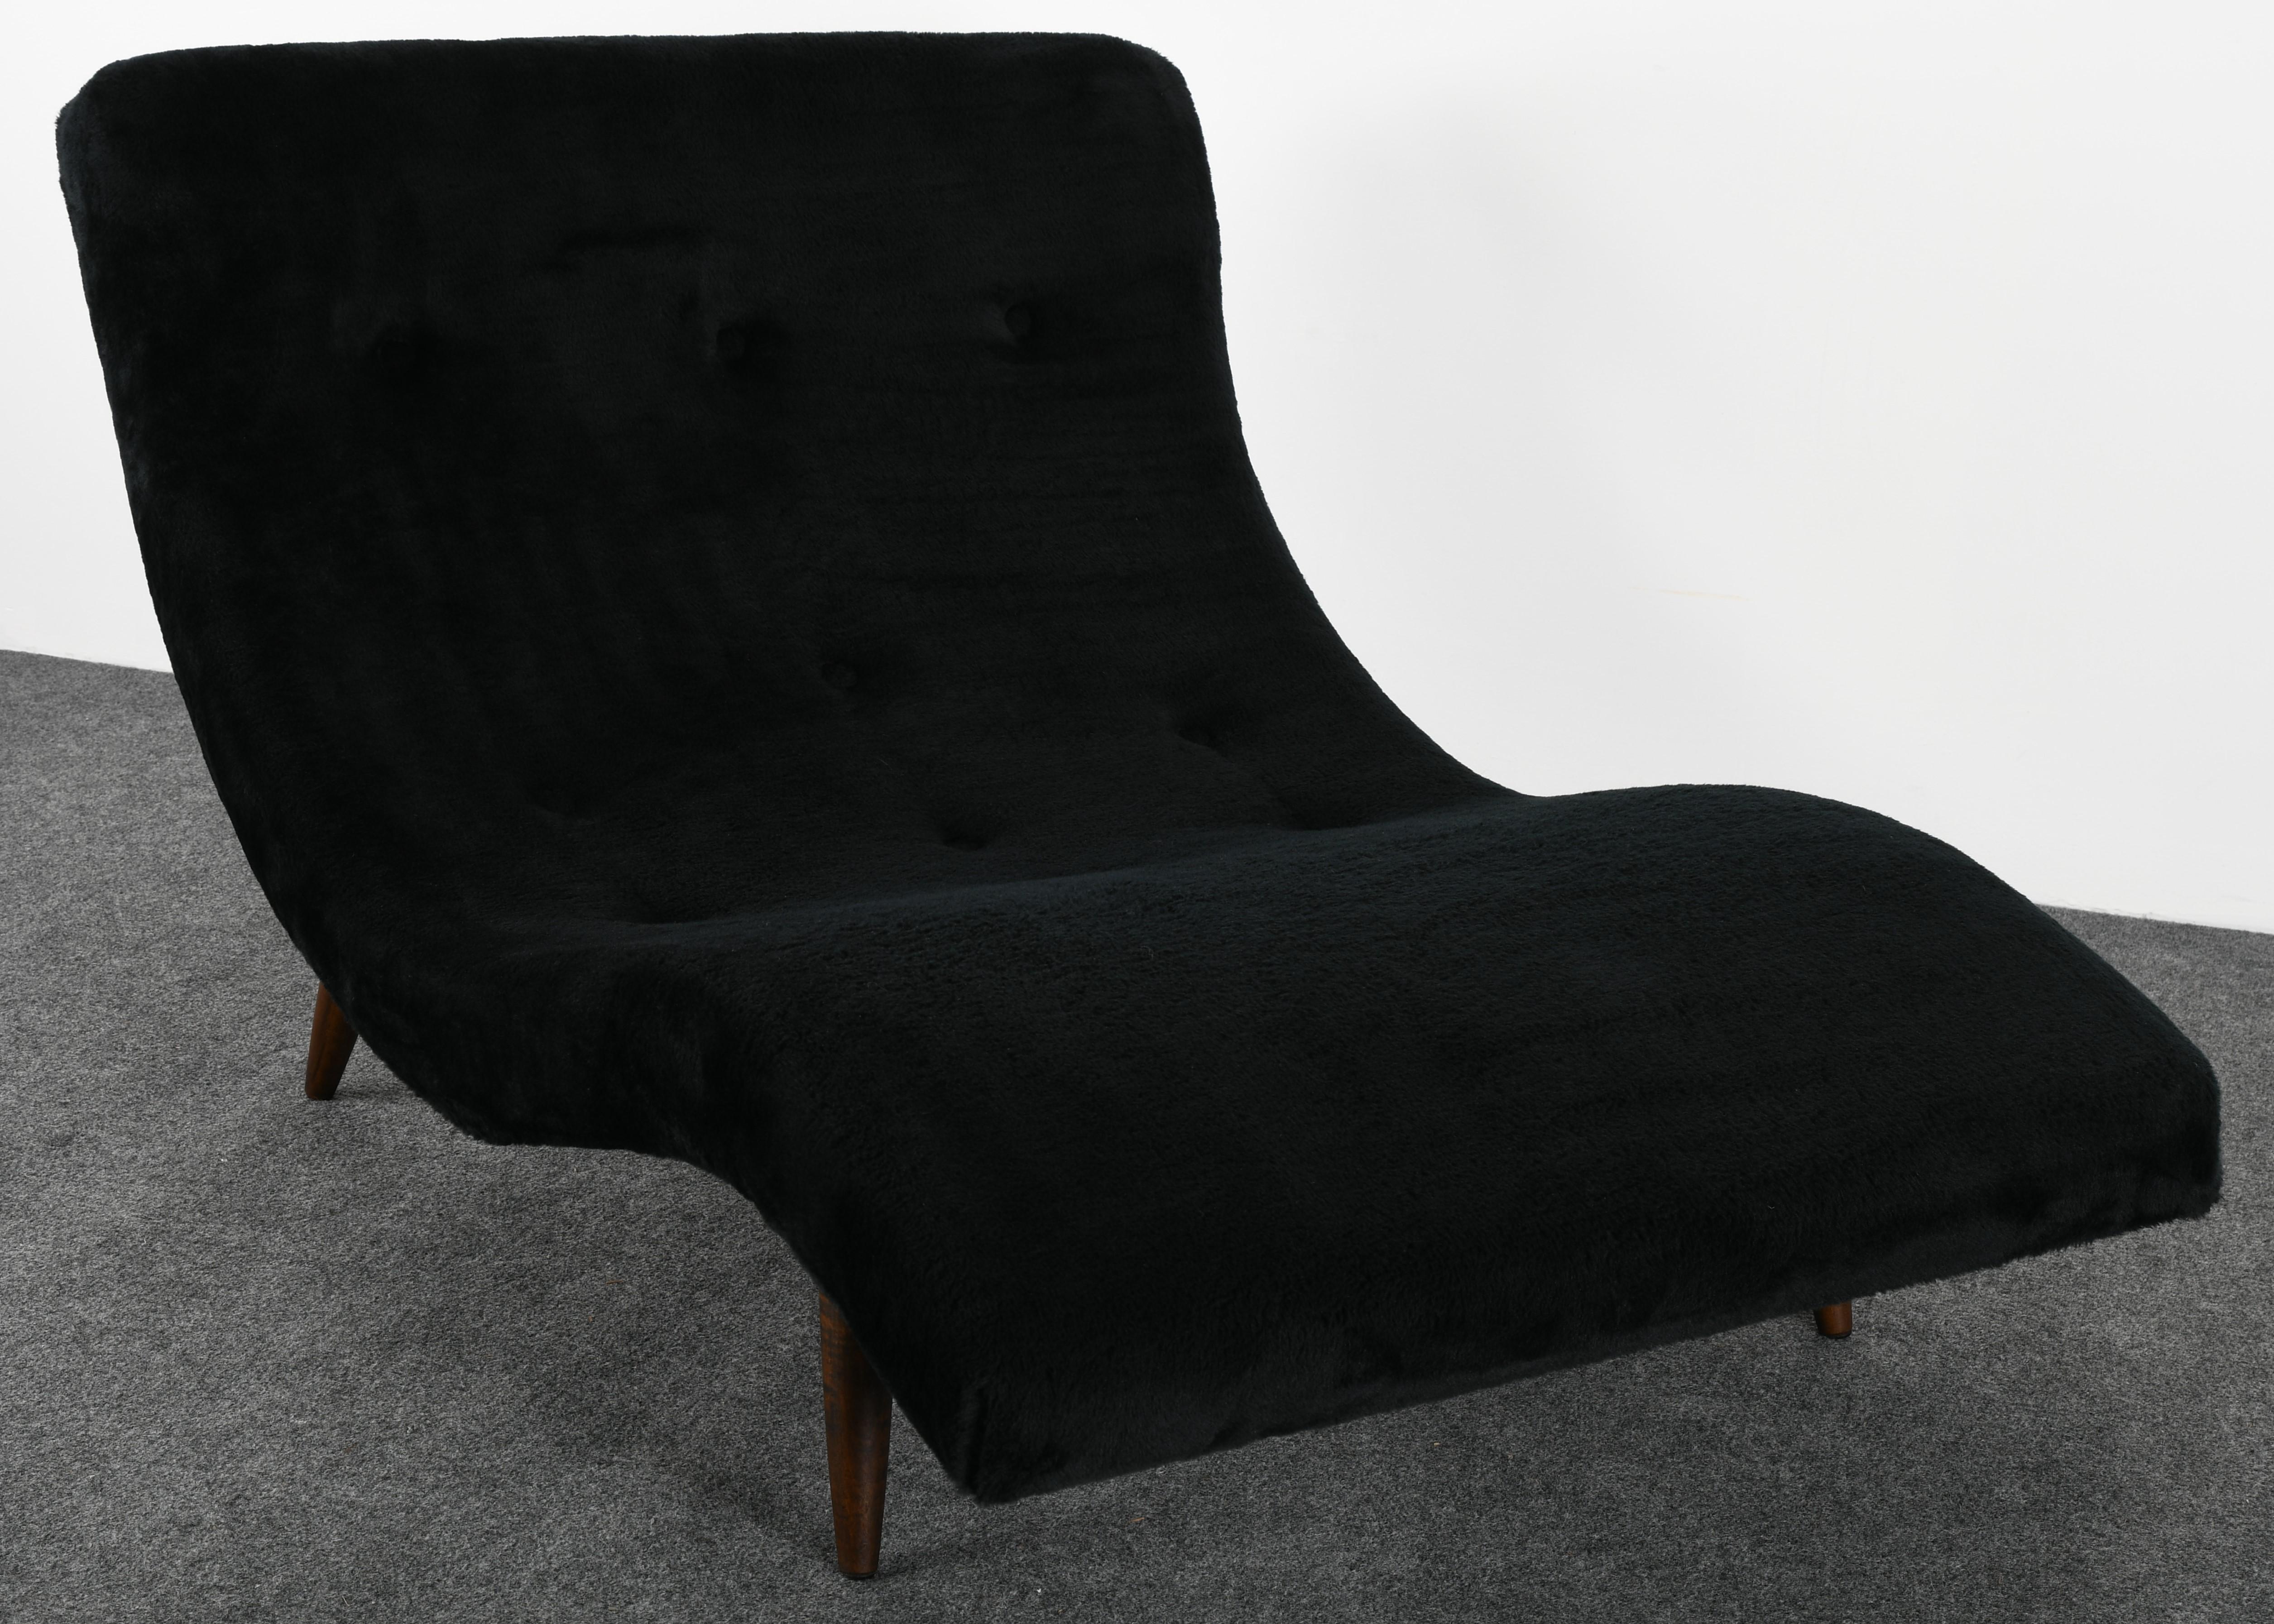 Mid-Century Modern Adrian Pearsall Wave Chaise for Craft Associates Inc., 1960s